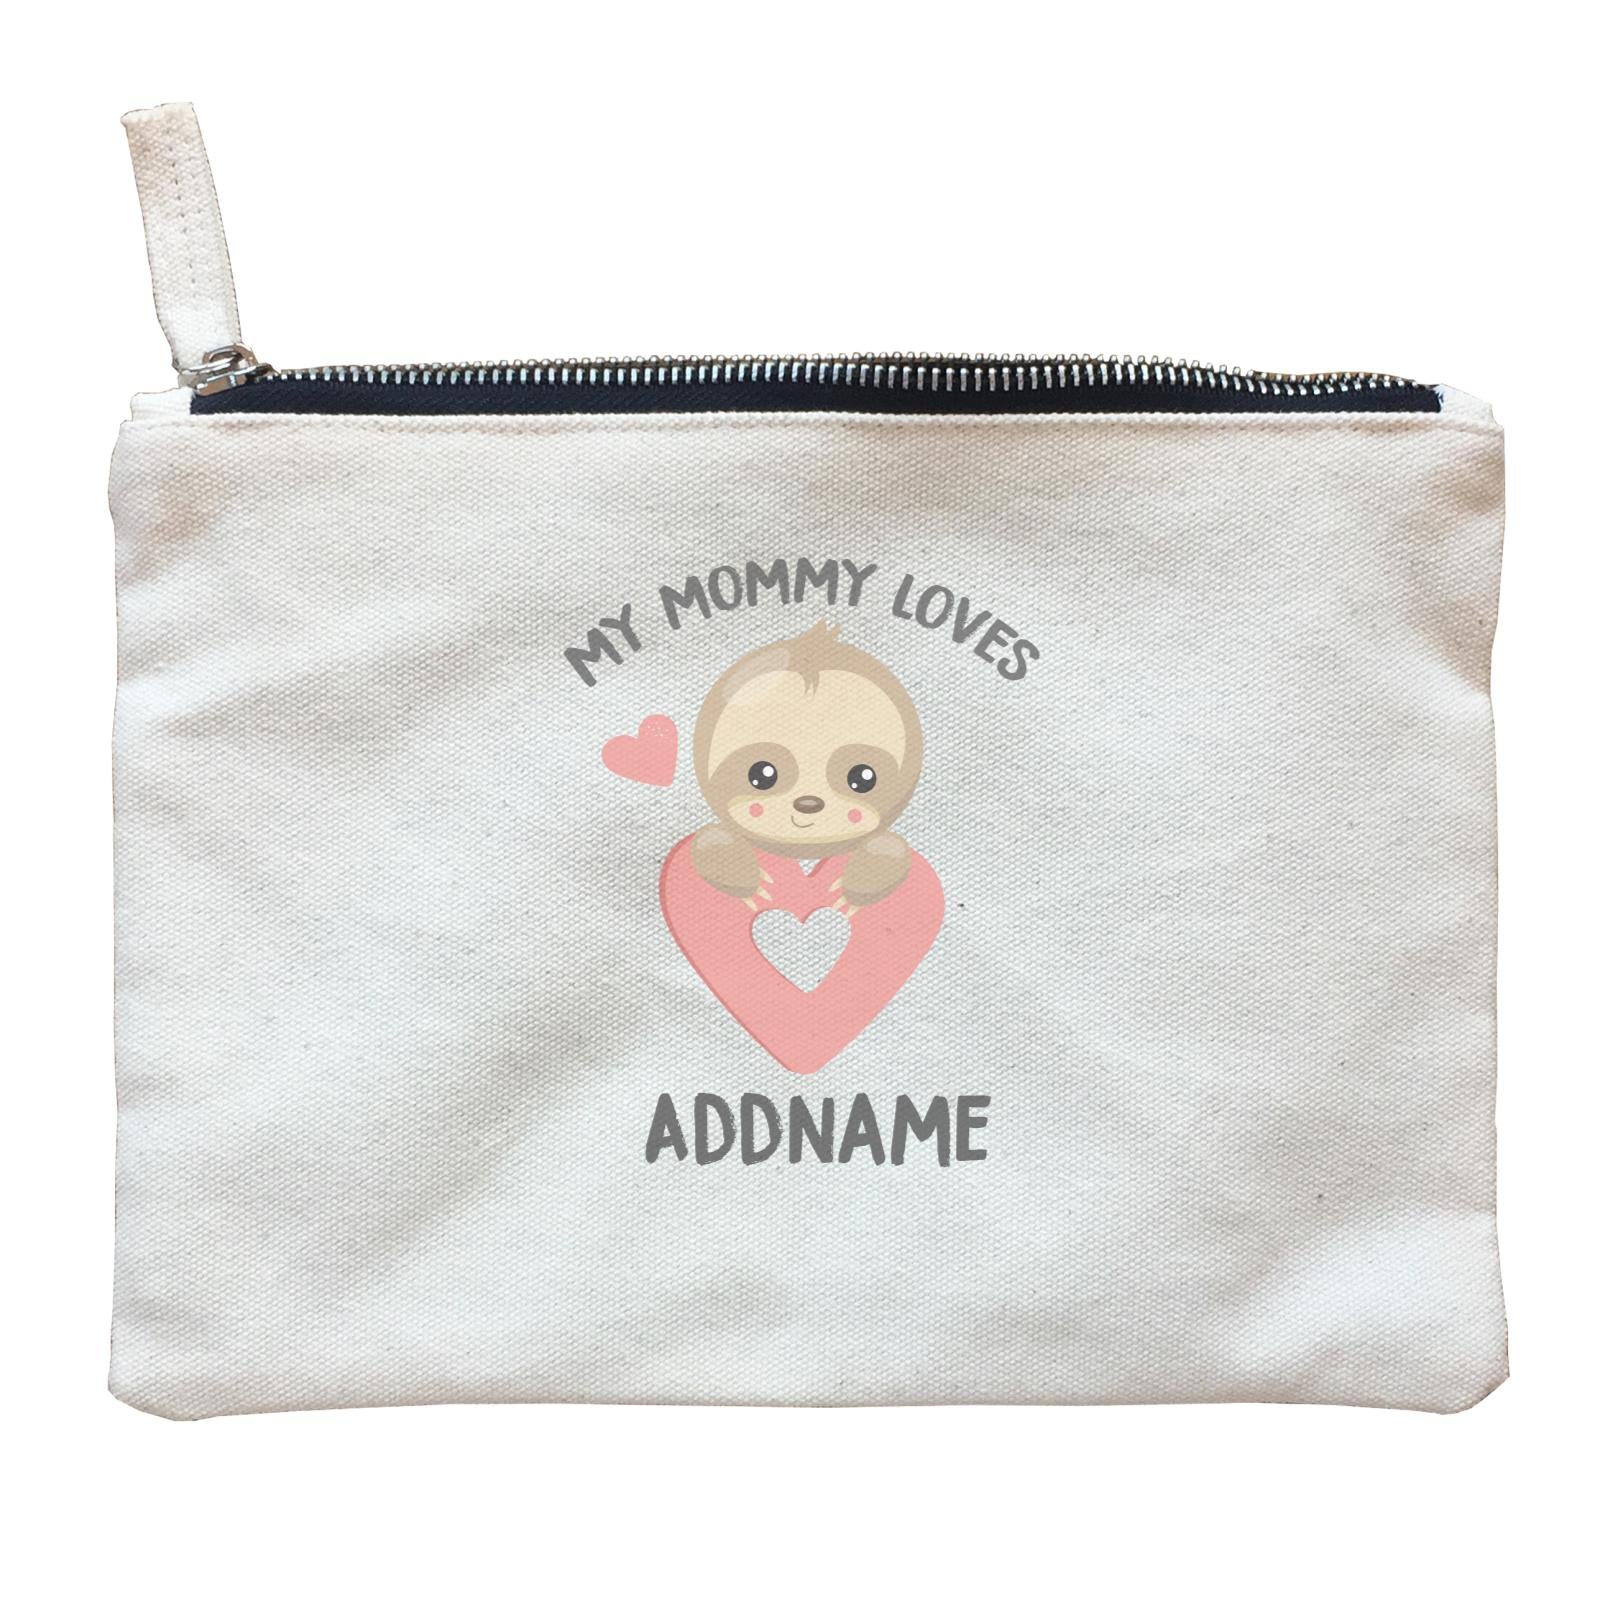 Cute Sloth My Mommy Loves Addname Zipper Pouch